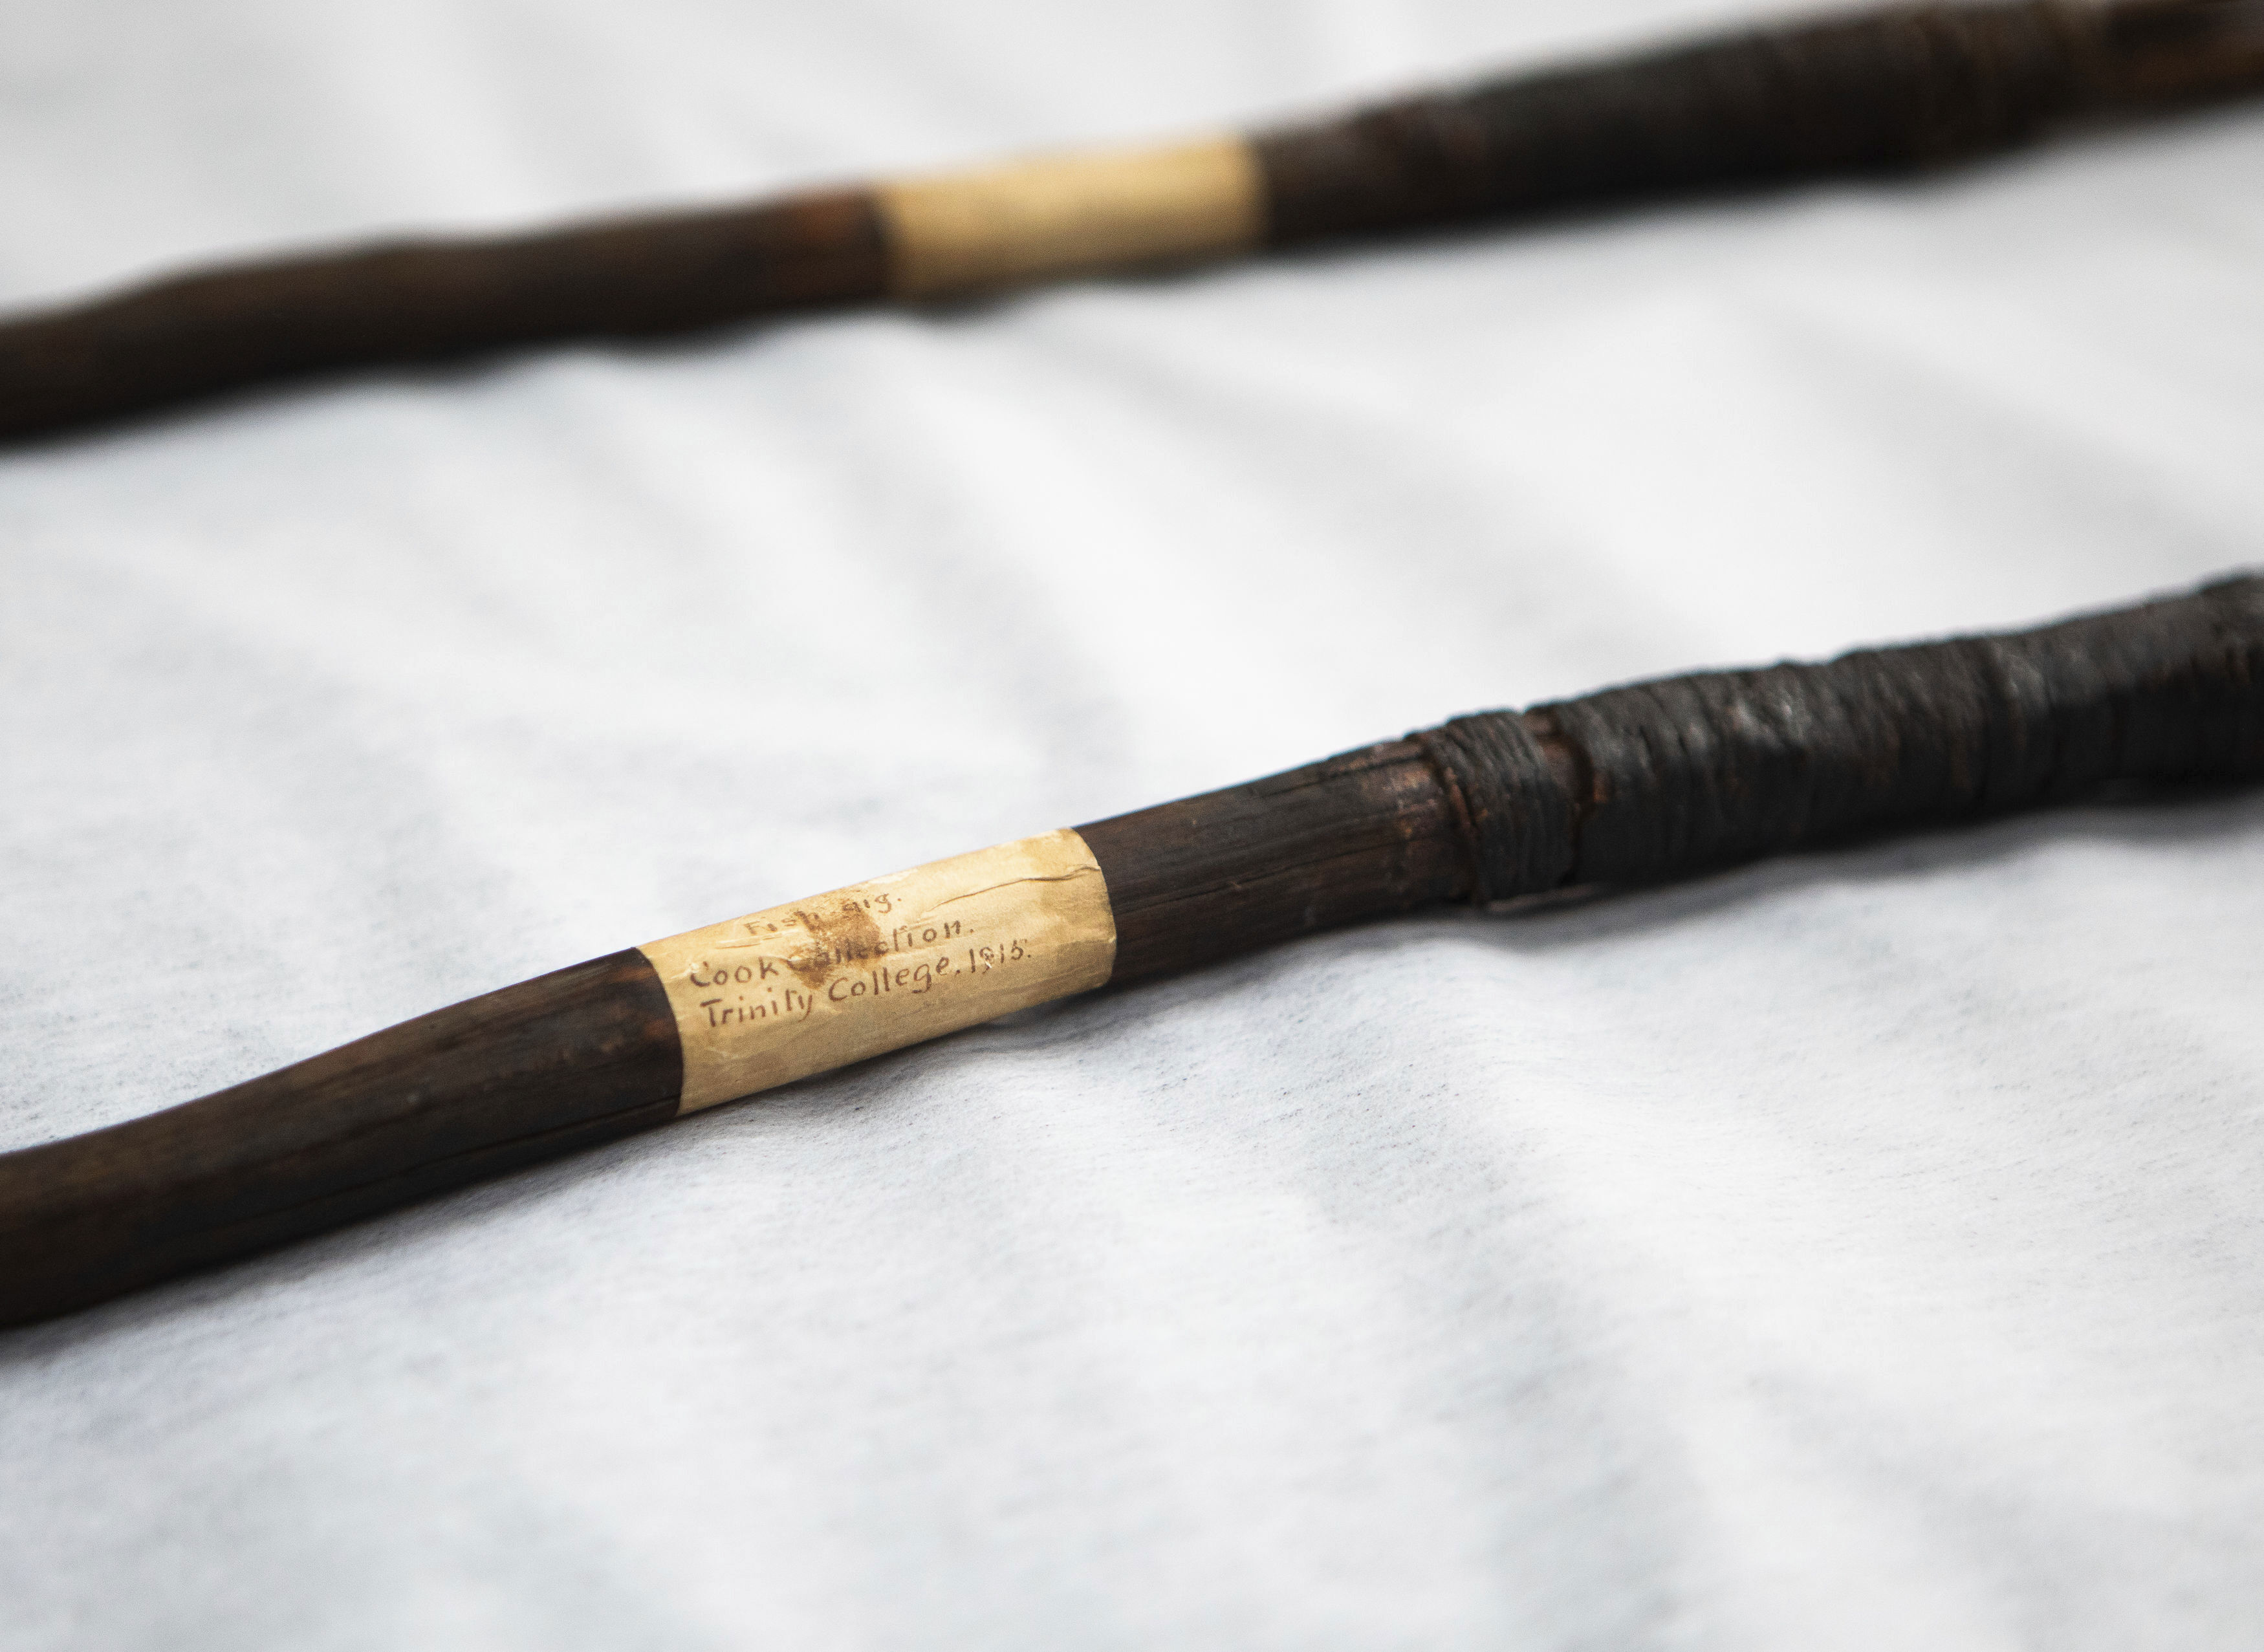 Two of four Aboriginal spears that were brought to England by Captain James Cook more than 250 years ago and have now been repatriated to Australia in a ceremony at Trinity College in Cambridge, Tuesday April 23, 2024.